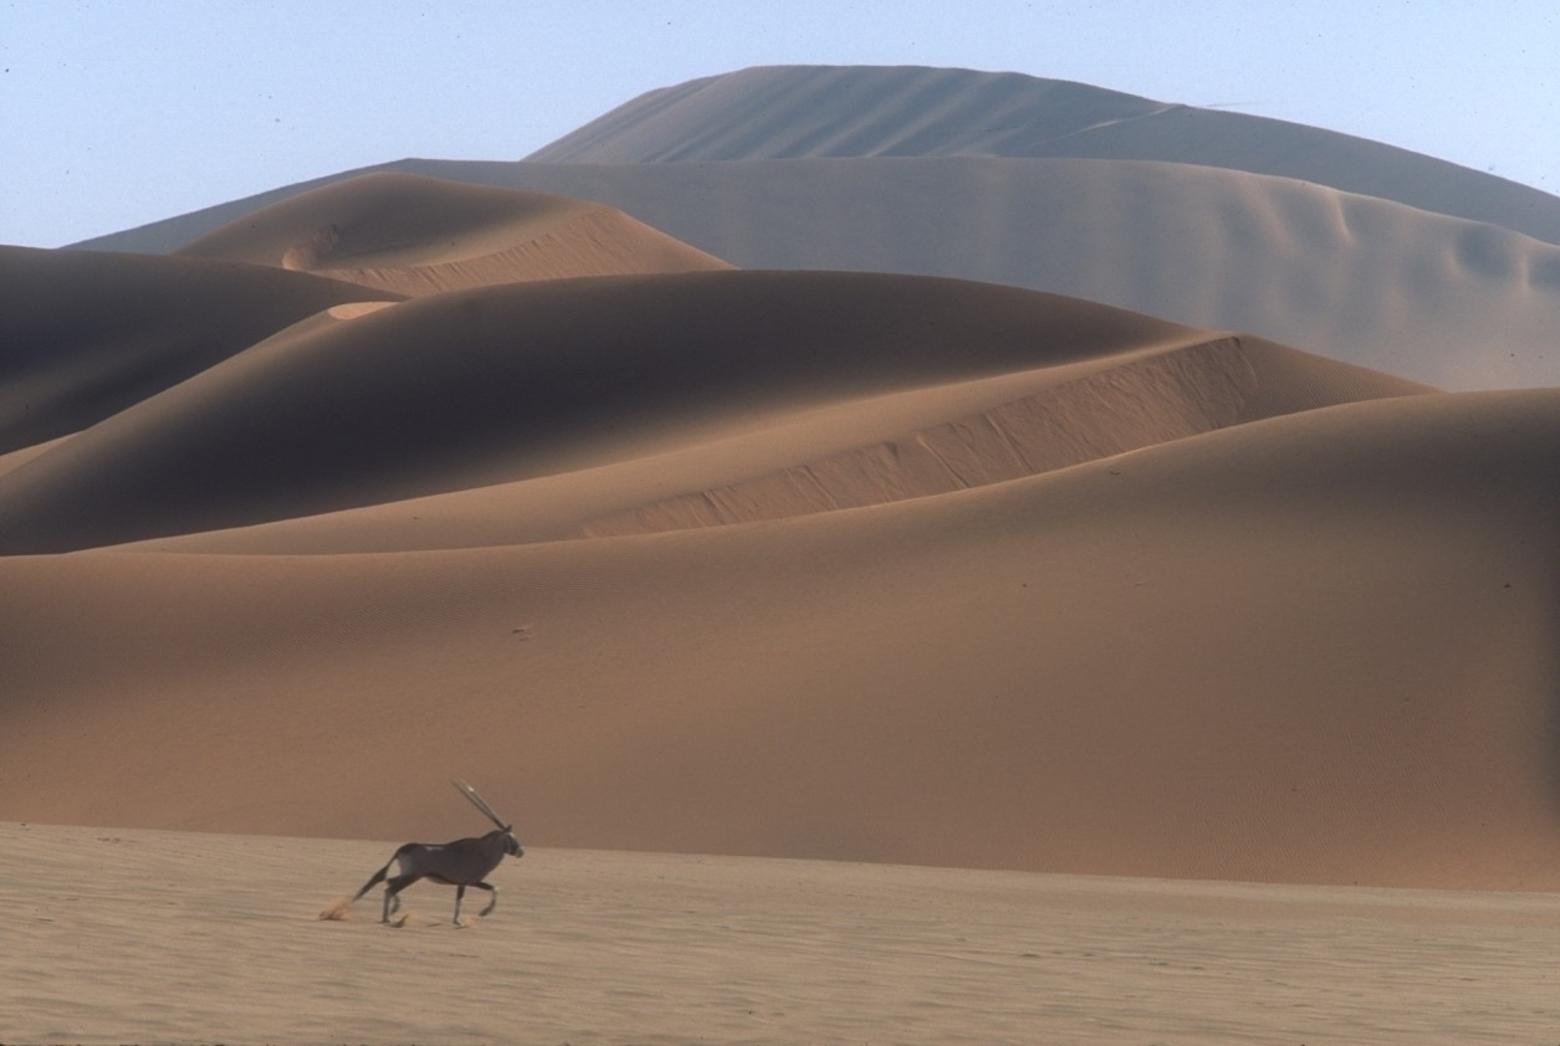 A Gemsbok moves amid the great dunes of the Namib Desert. The species is highly adapted to life in the often waterless, intensely hot, fierce environment it makes its own. Both environments take their toll on individuals but in both worlds the species thrive. Photos by Steven Fuller